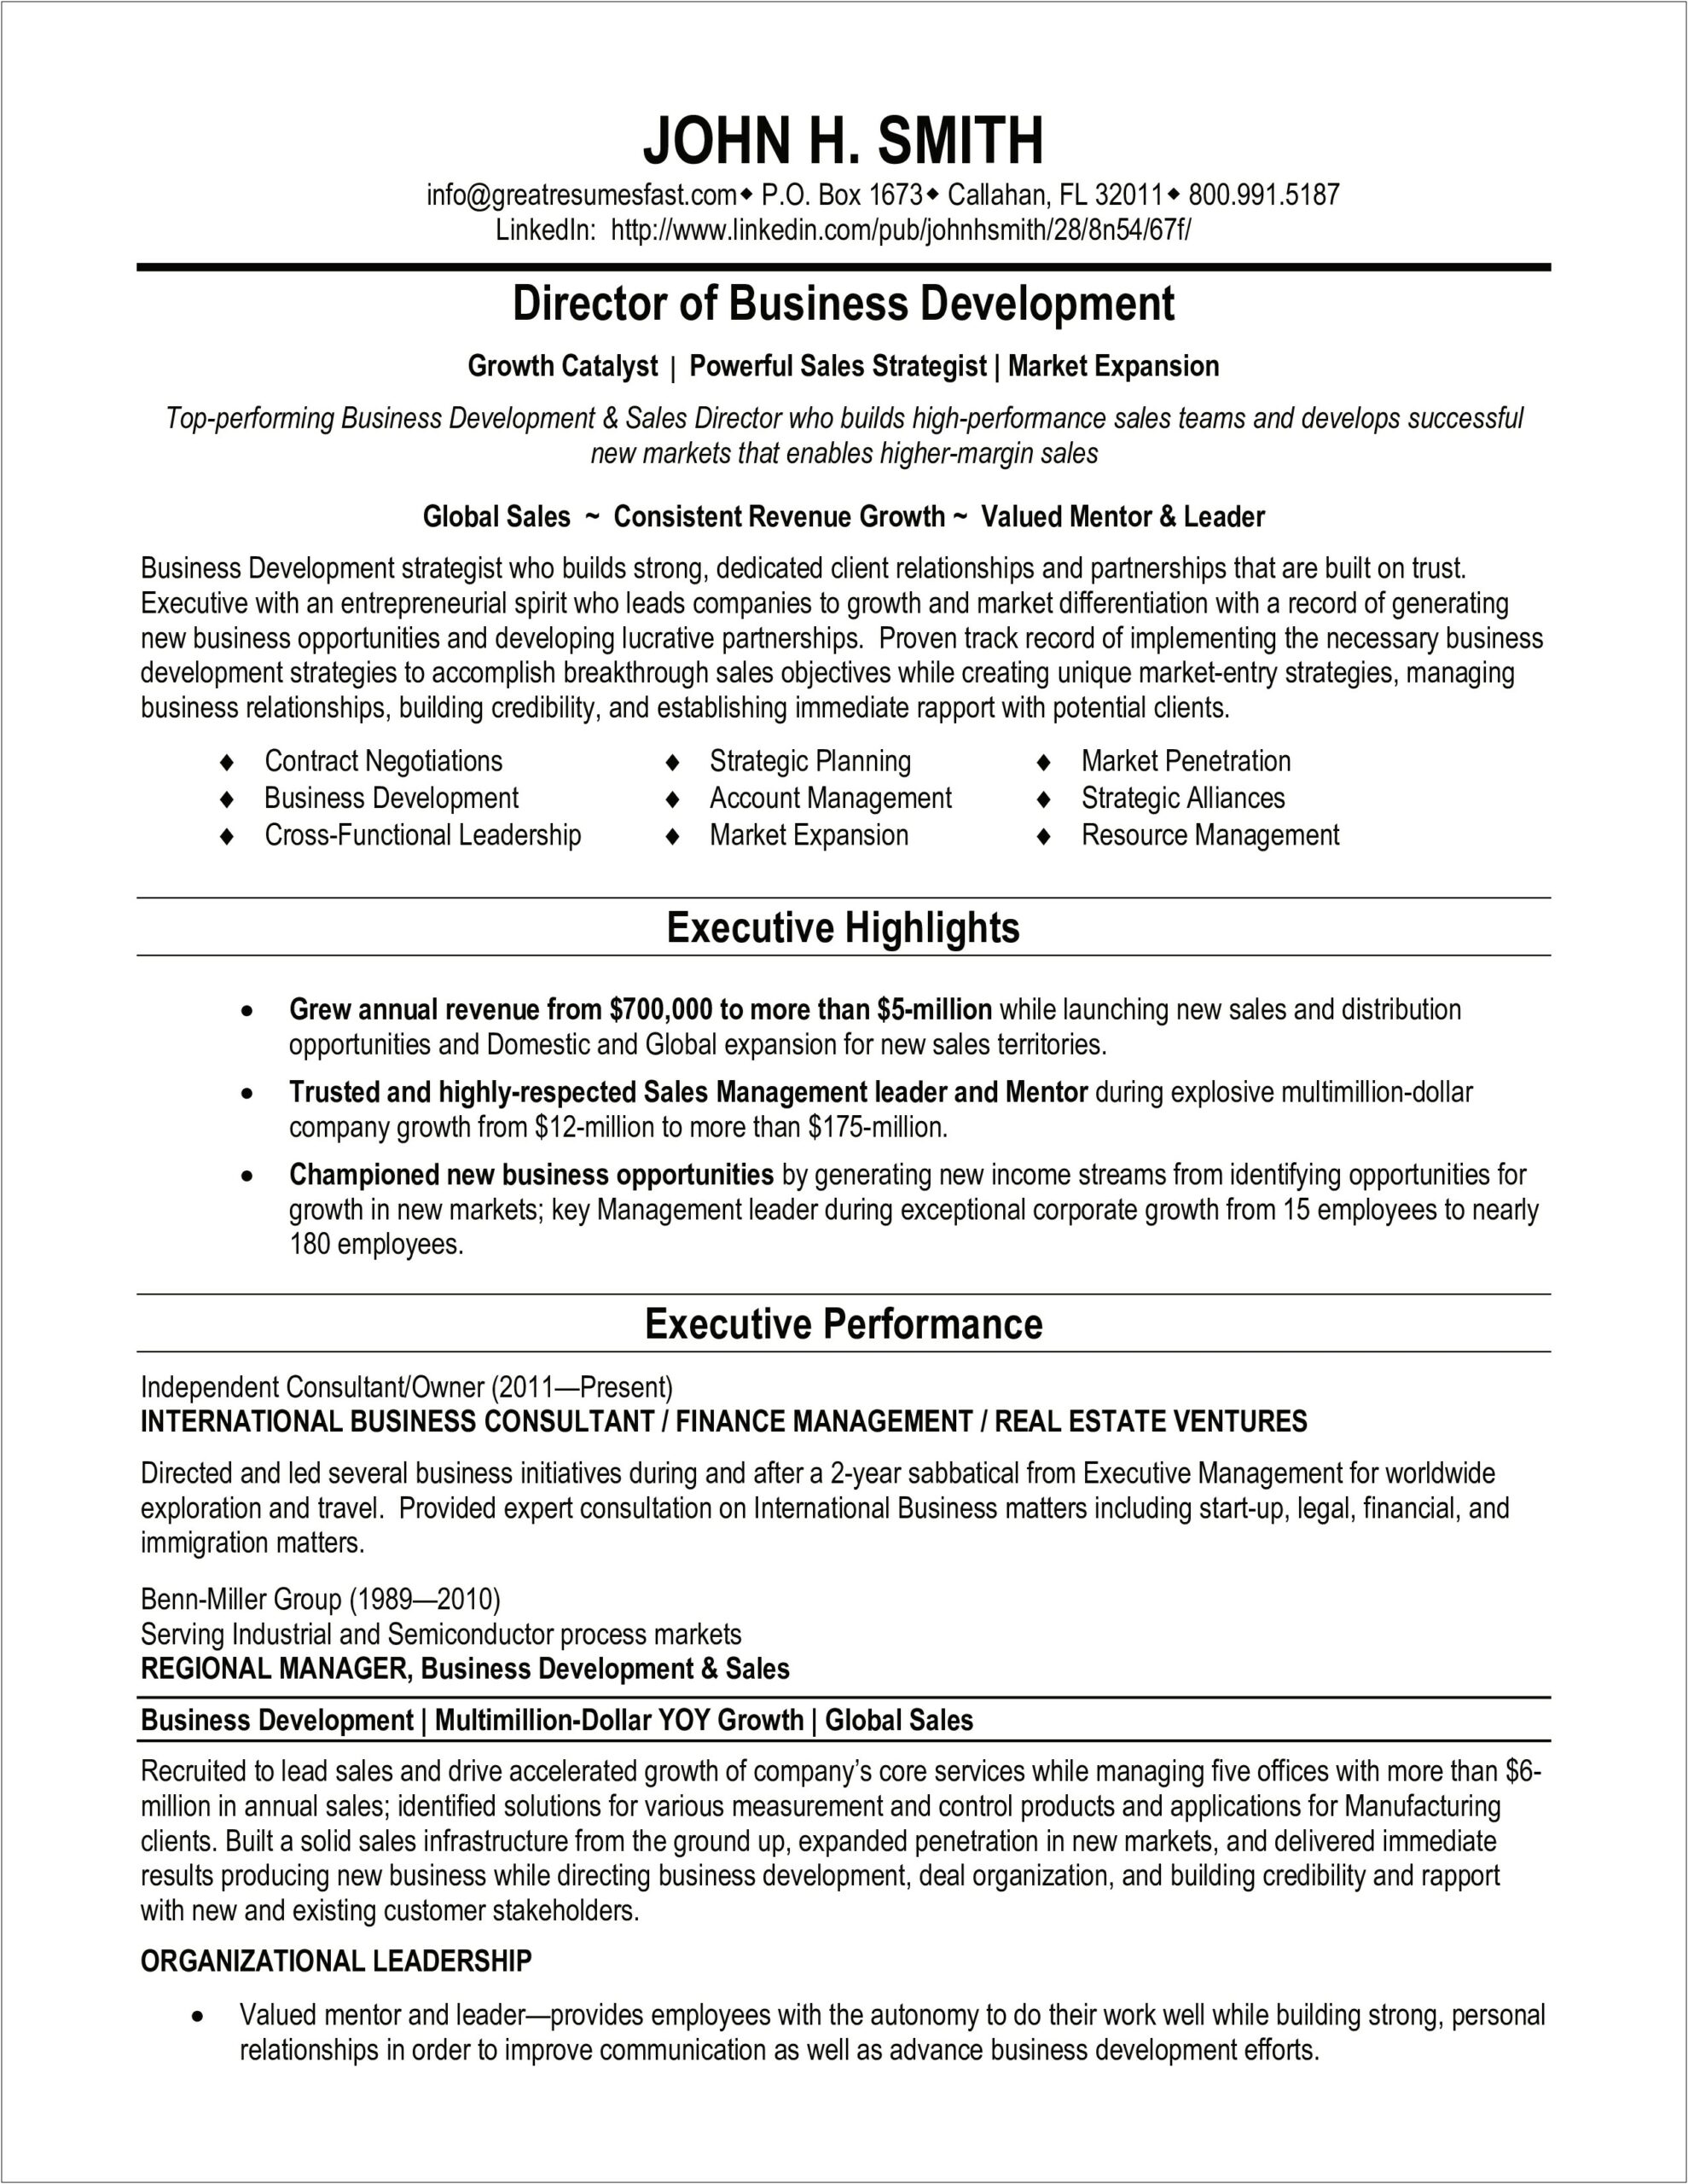 Resume Summary Example For A Business Development